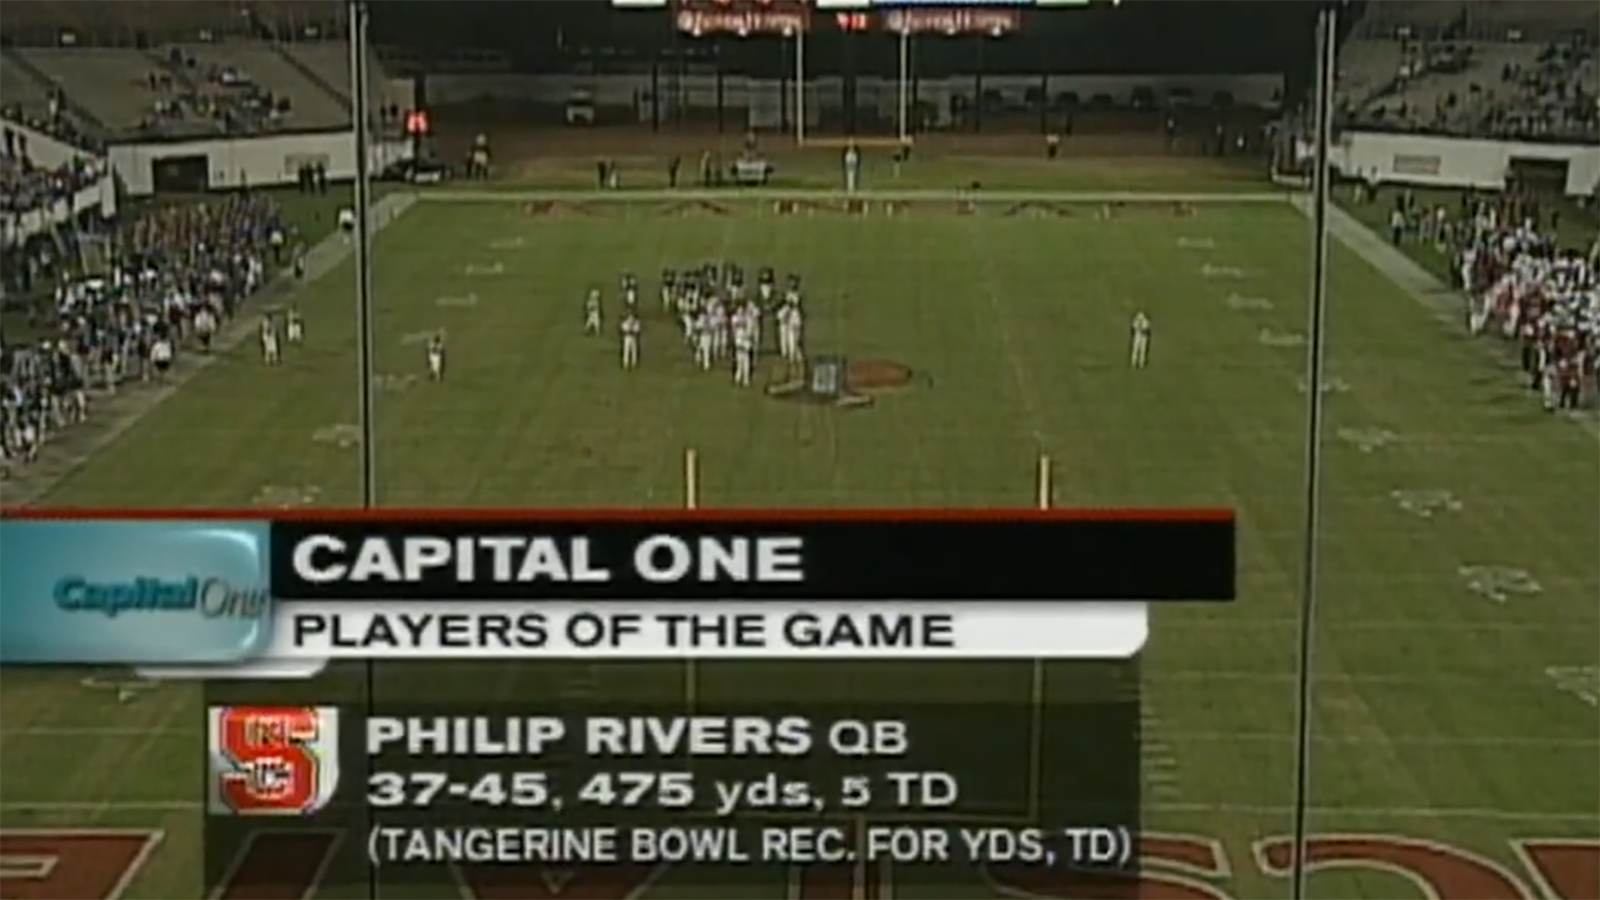 Classic Bowl Performances: Philip Rivers finishes his career in style